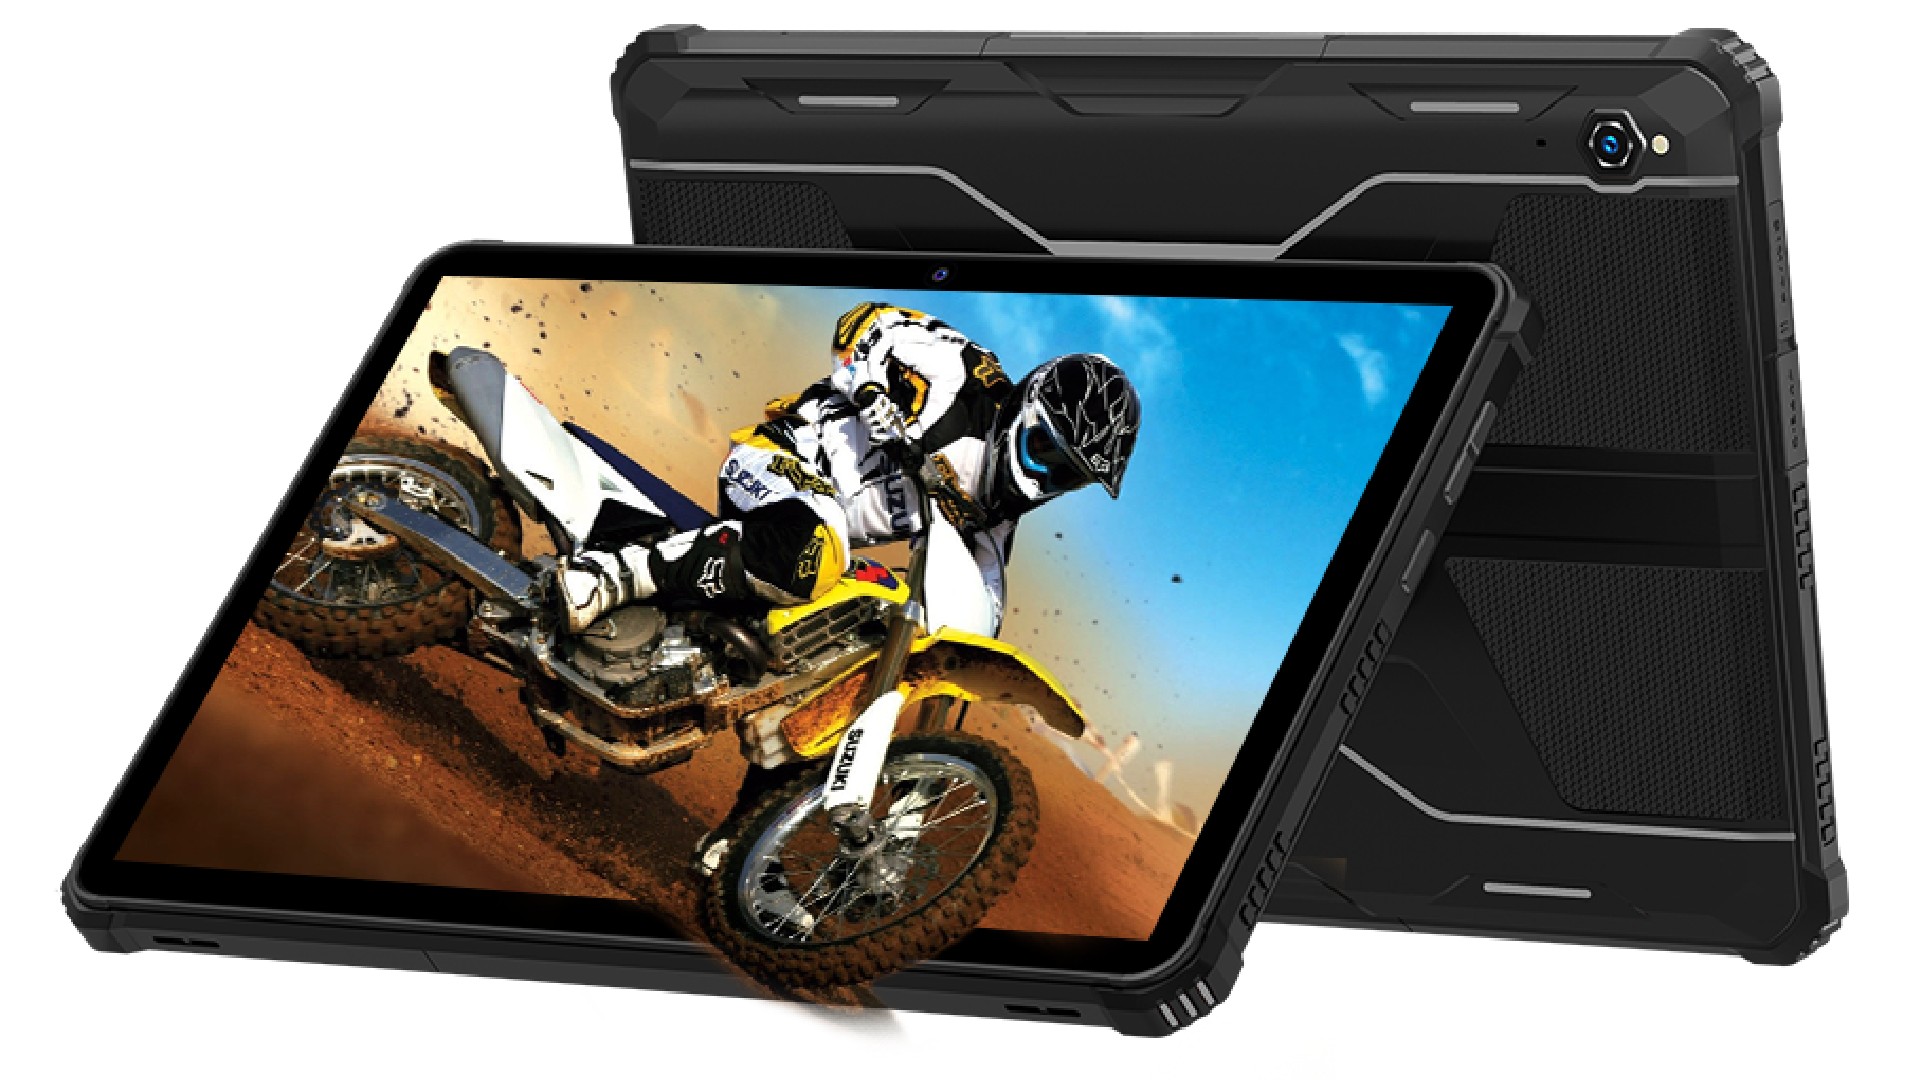 Product shot of Oukitel RT1, one of the best rugged tablets